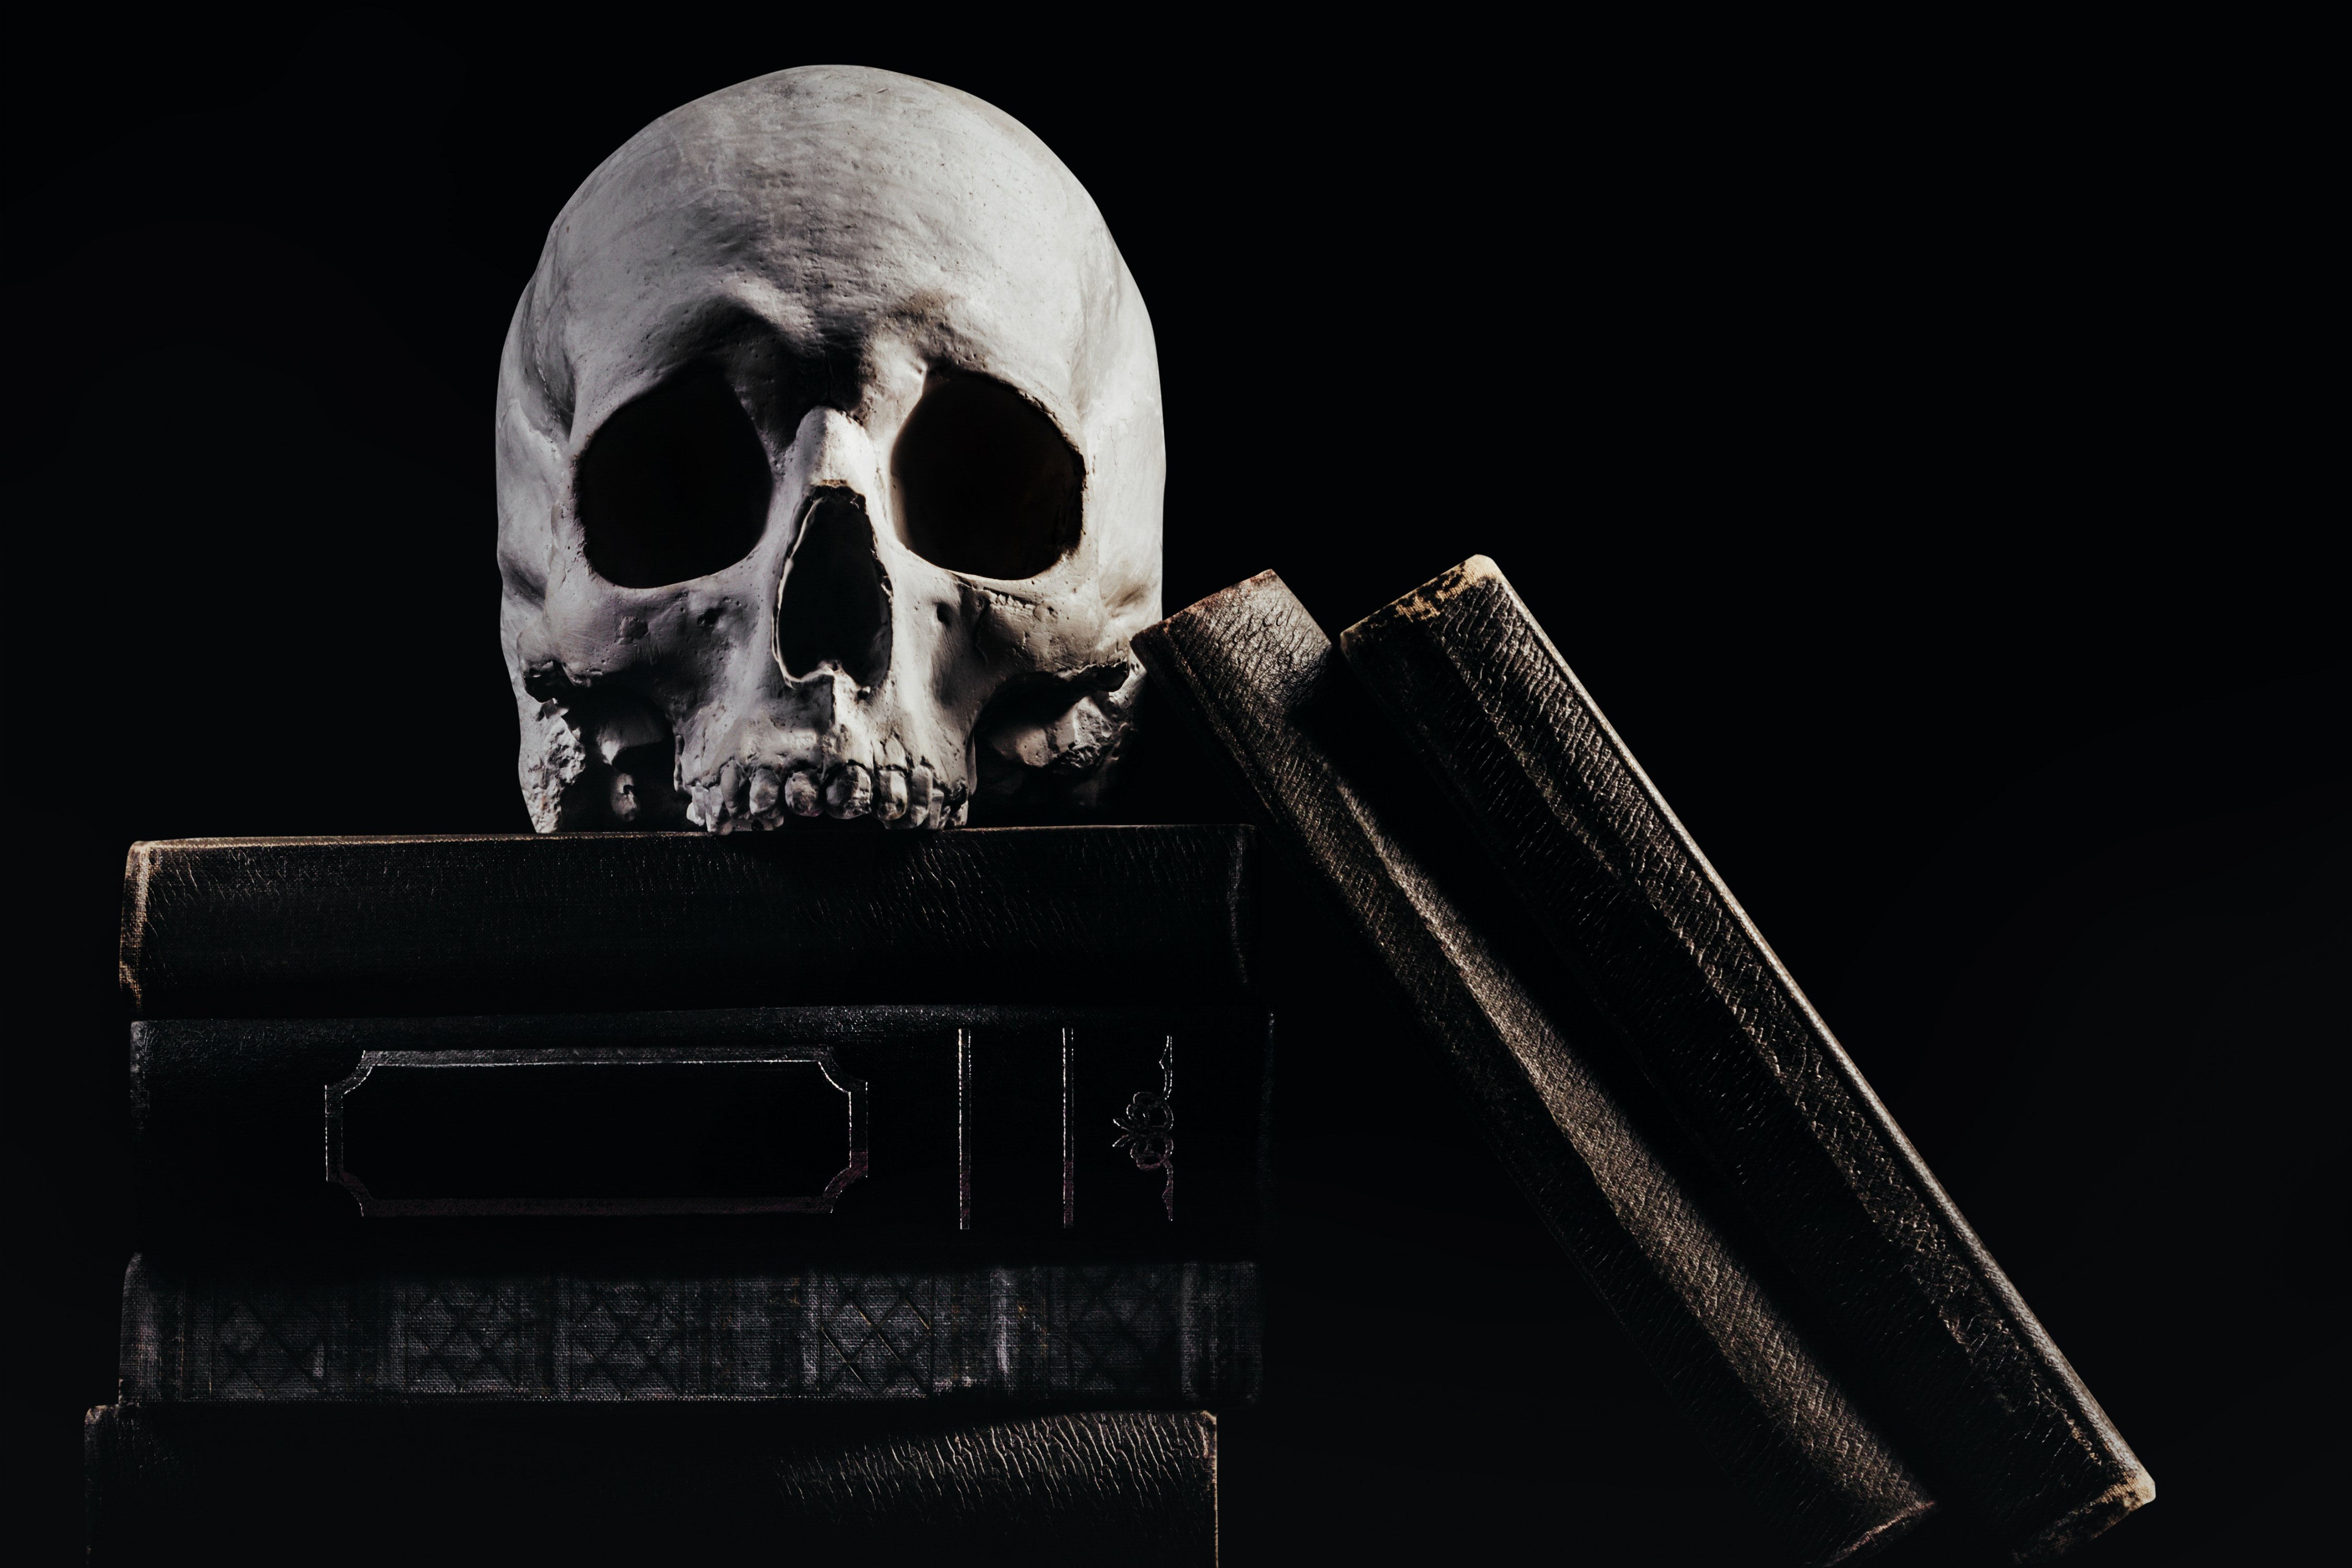 Skull with Books